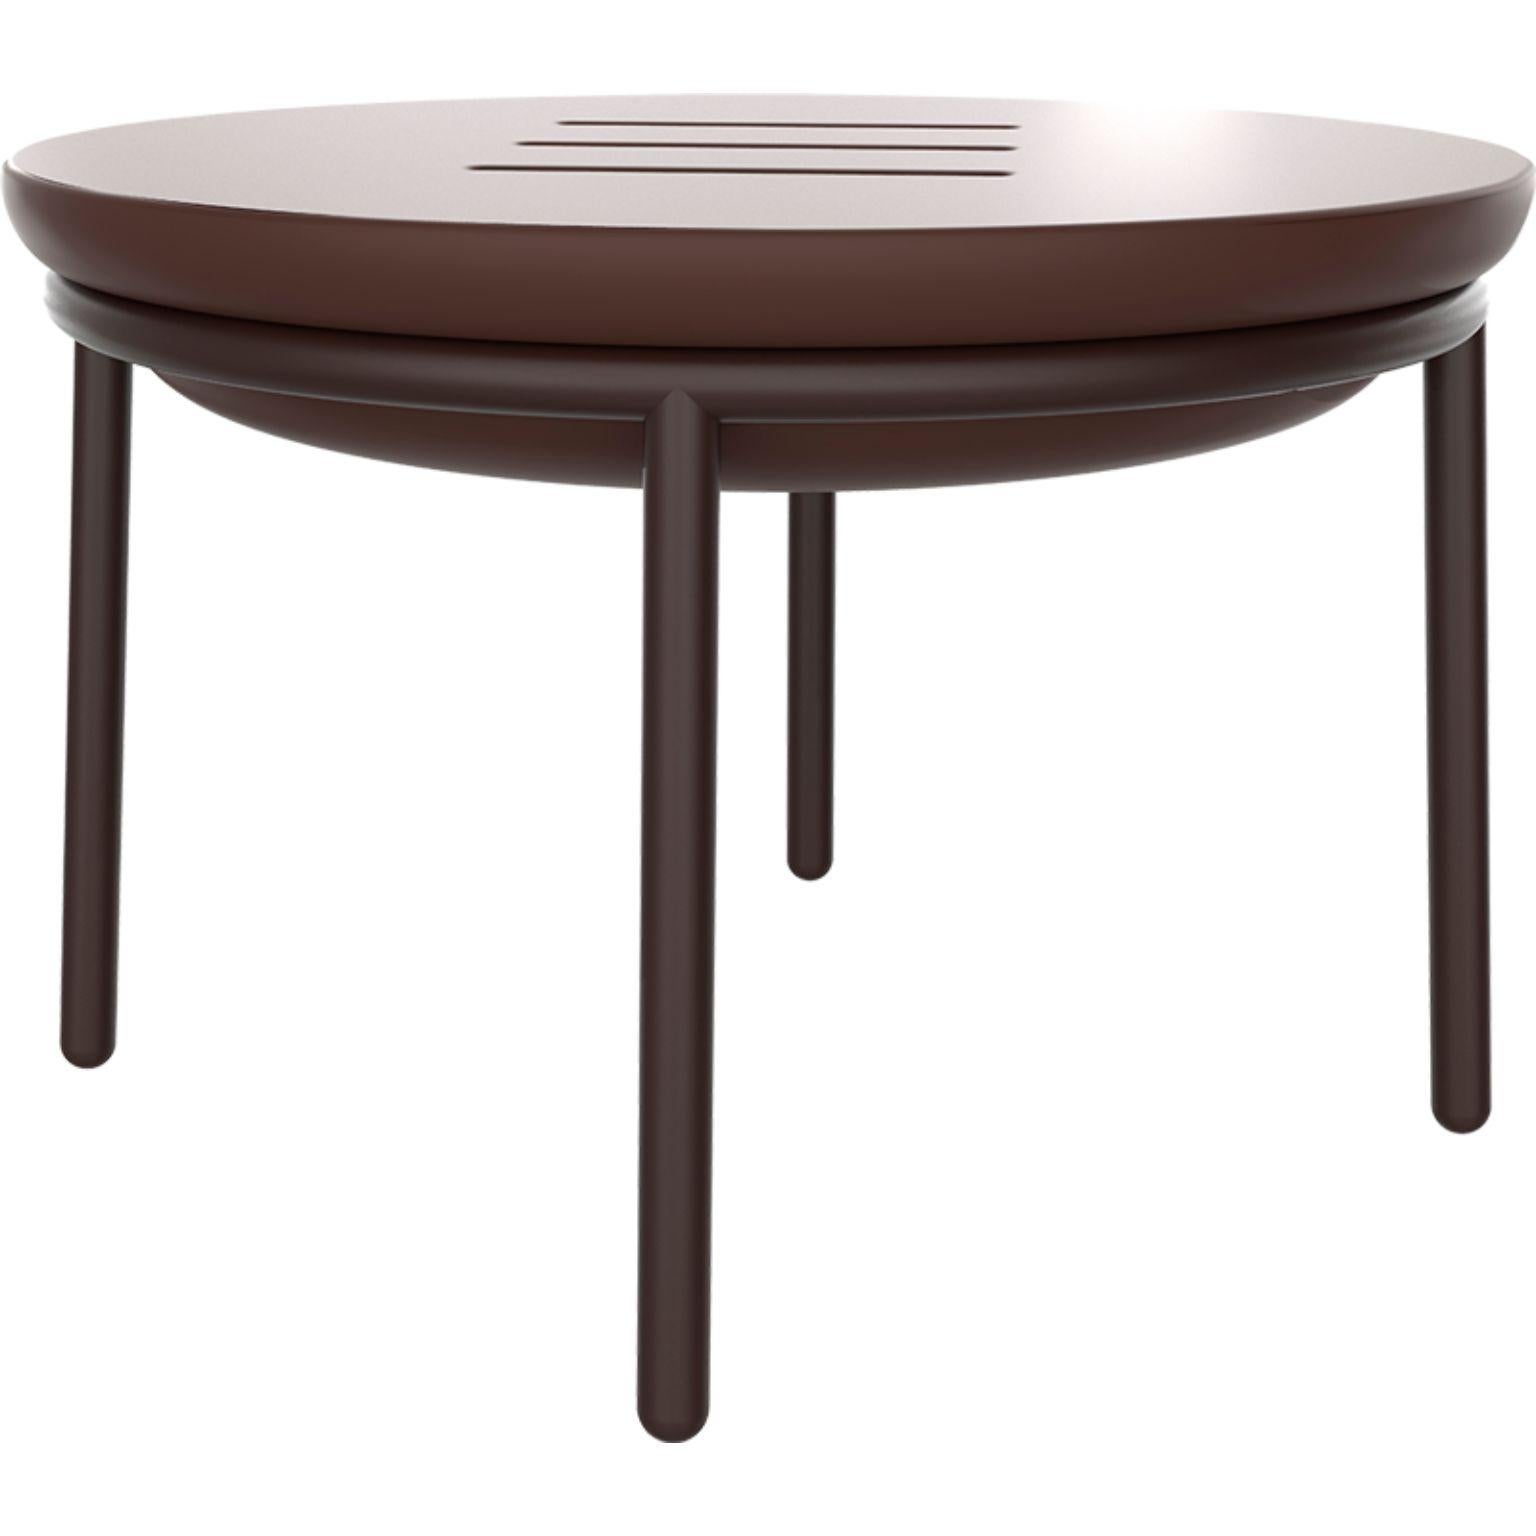 Lace chocolate 60 low table by MOWEE
Dimensions: Ø60 x H41 cm
Material: polyethylene and stainless steel.
Weight: 6.2 kg.
Also available in different colors and finishes (lacquered). 

Lace is a collection of furniture made by rotomoulding.